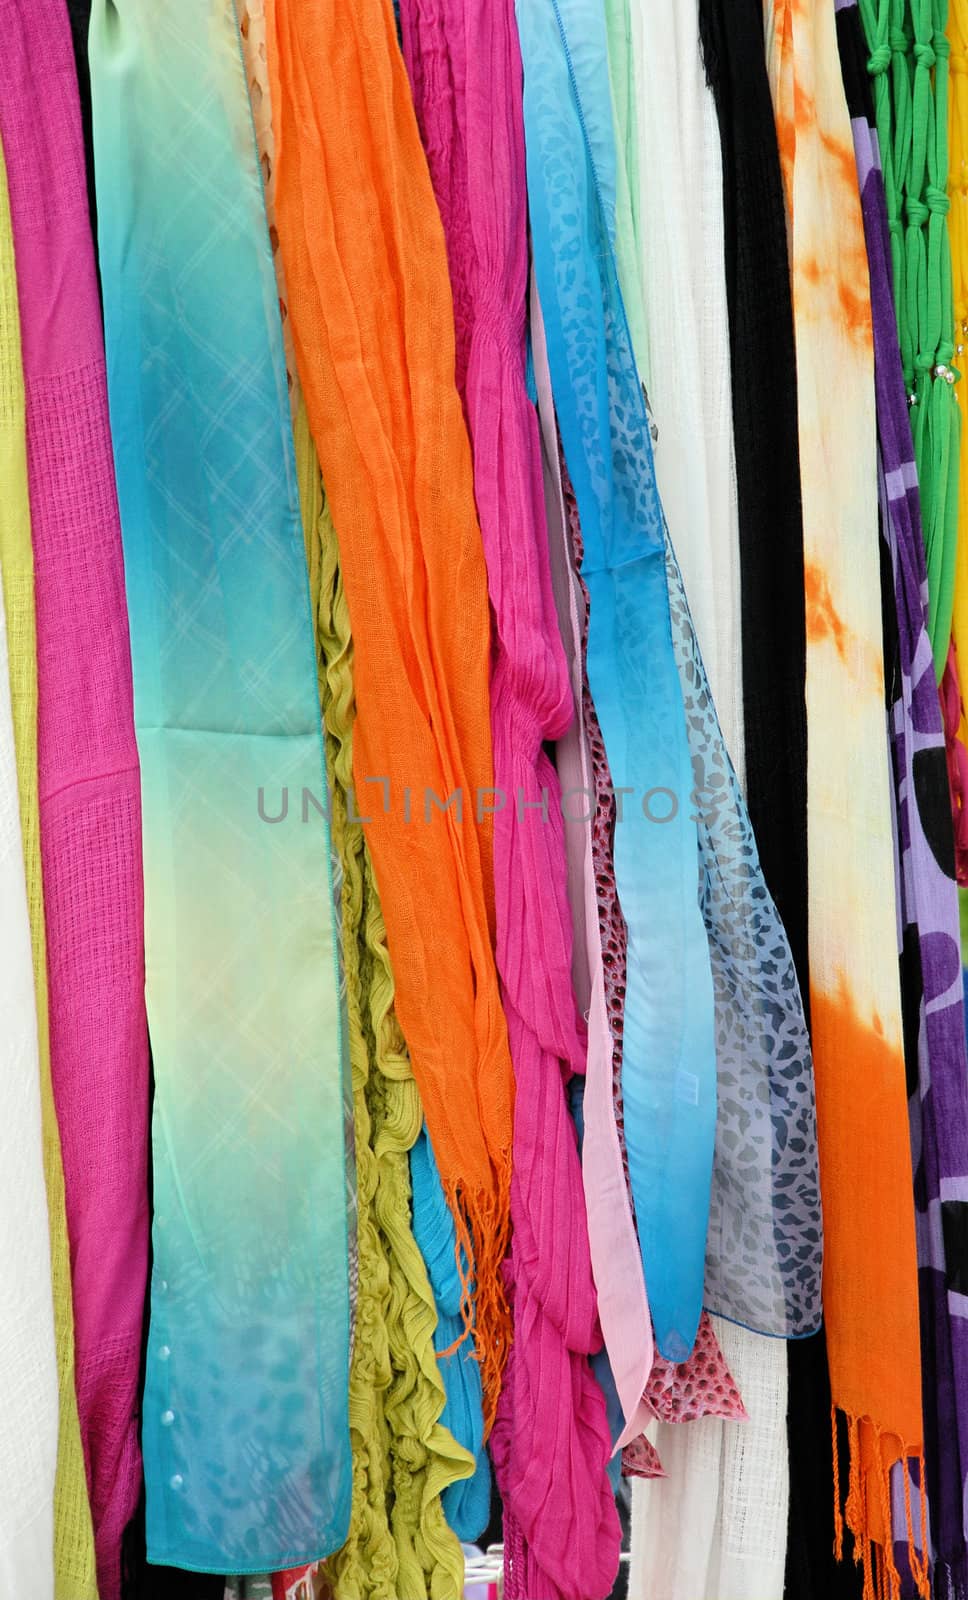 colorful scarfs for sale at a local street market